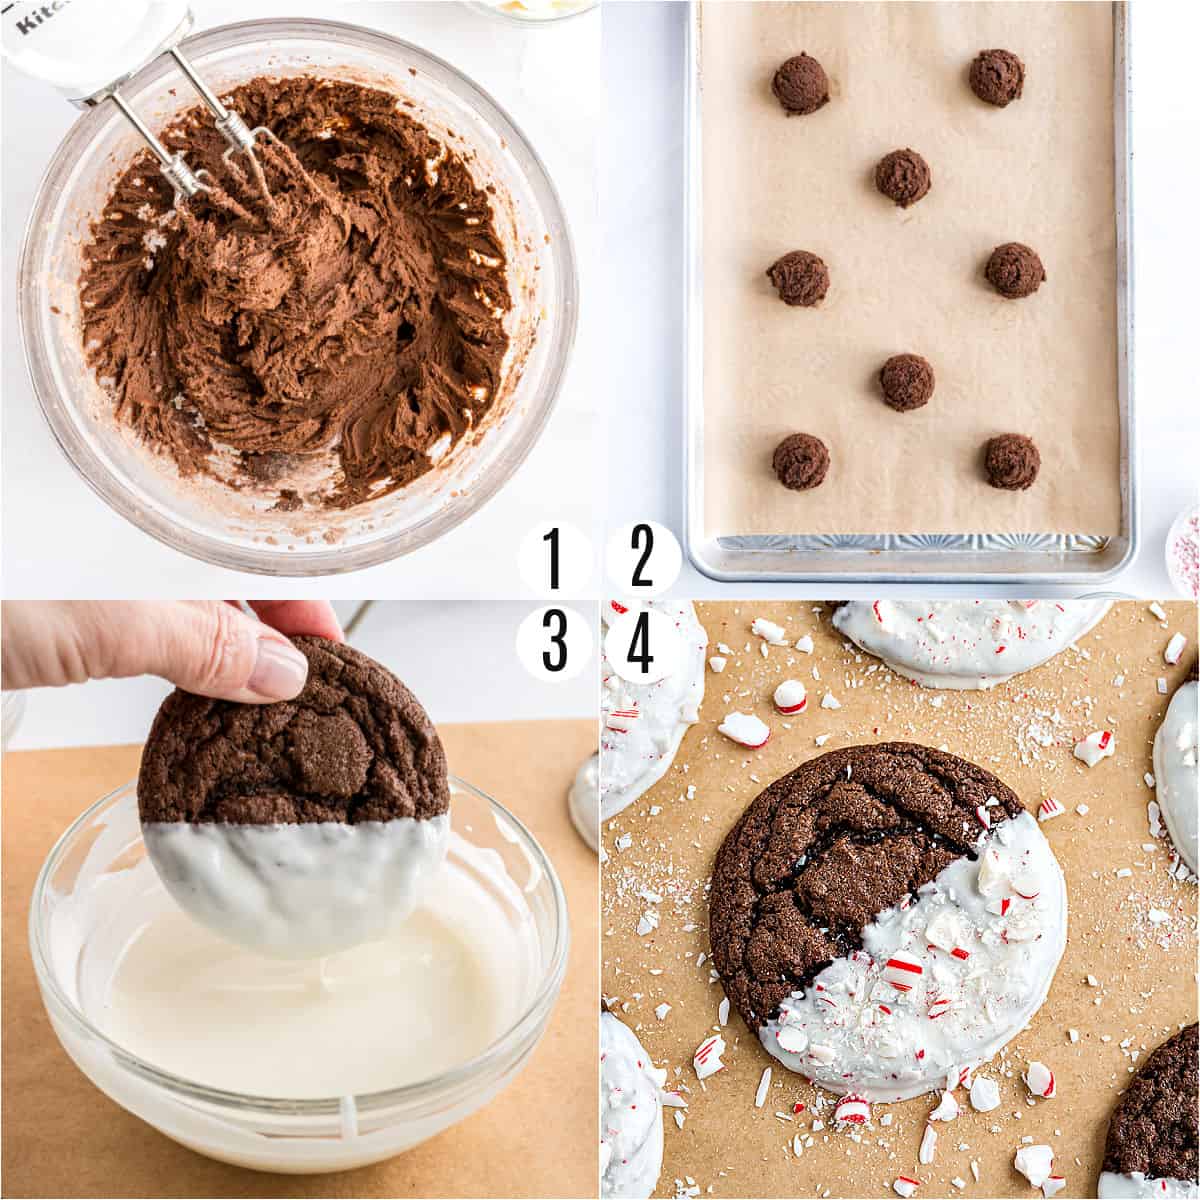 Step by step photos showing how to make chocolate peppermint cookies.